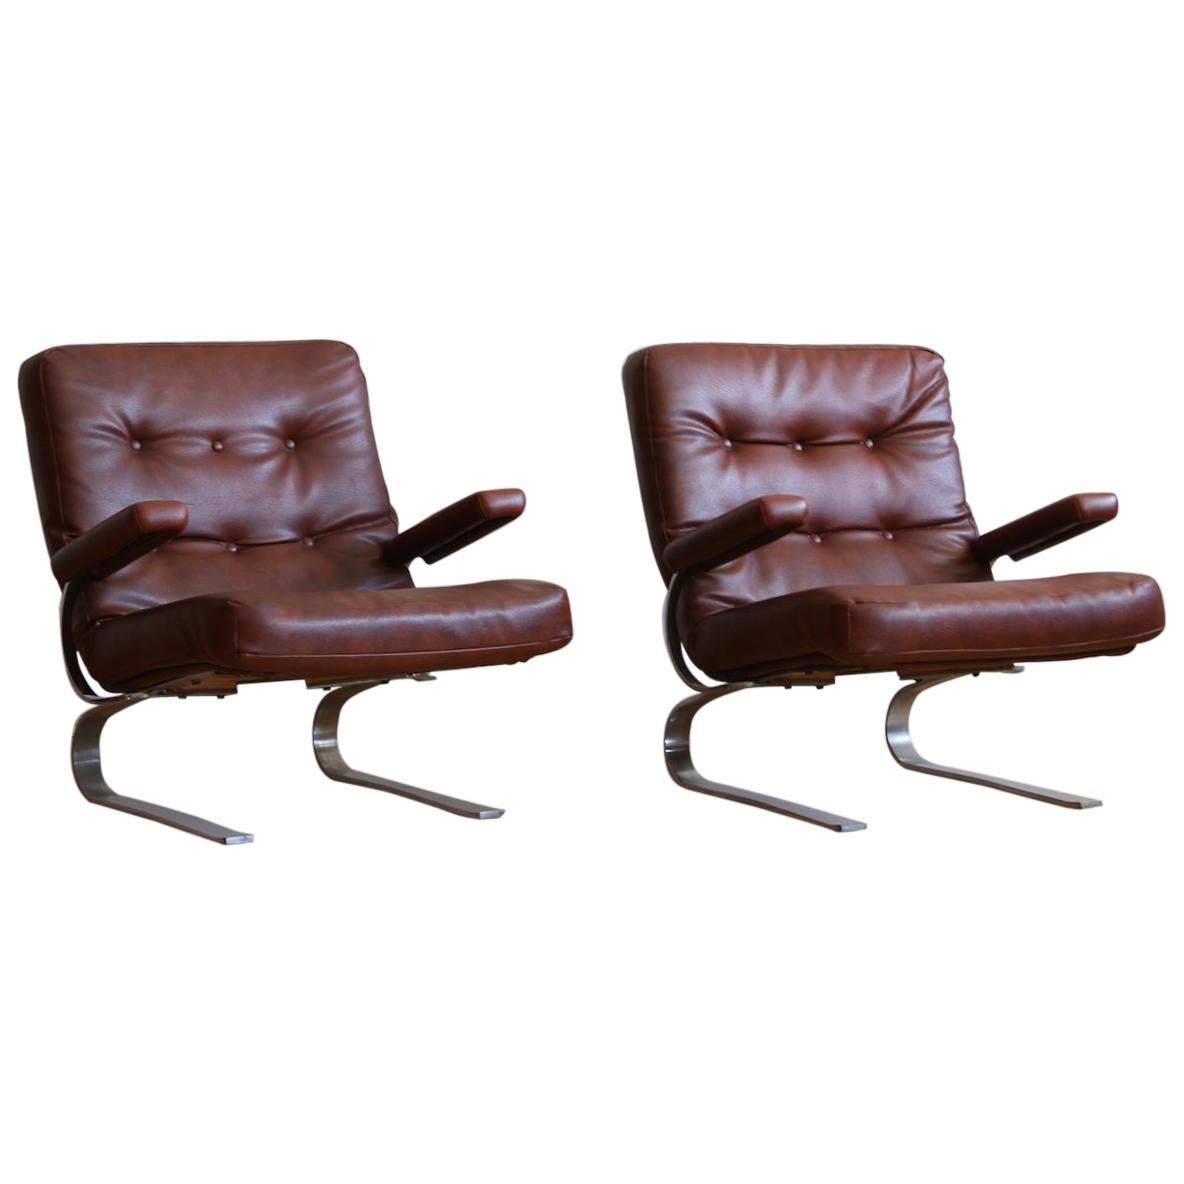 Pair of Mid-Century Modern Danish Leather Lounge Chairs